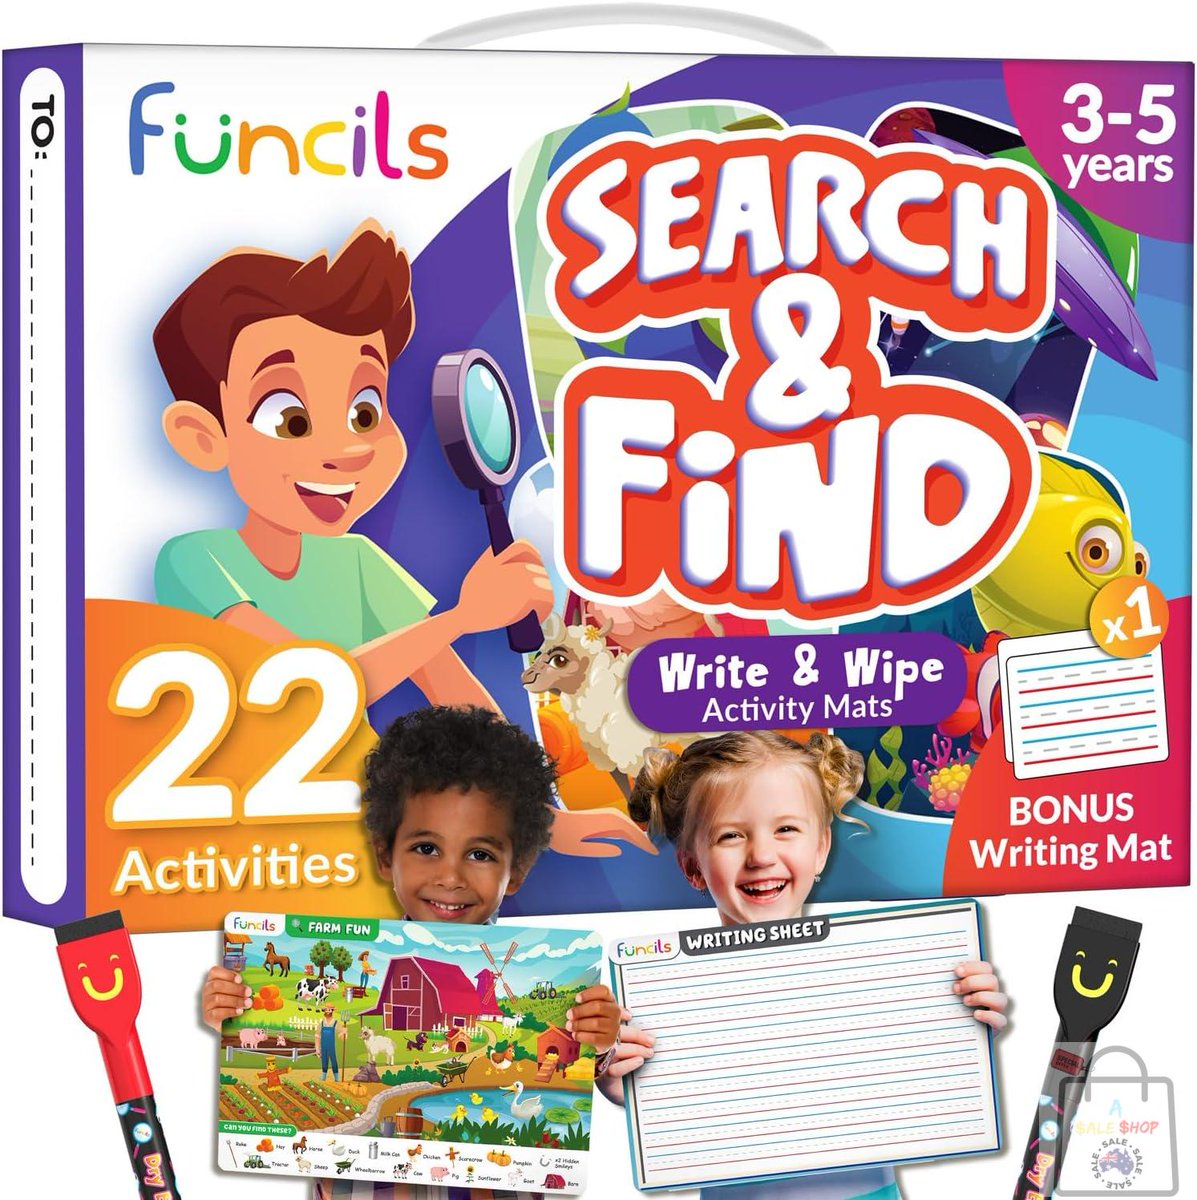 Discover endless fun & learning with our 12 unique double-sided search & find reusable activity mats! Each features 22 repeatable toddler activities for interactive learning. Ideal for playful skill development. #ToddlerActivities #Learning

link: rfr.bz/tladd3m